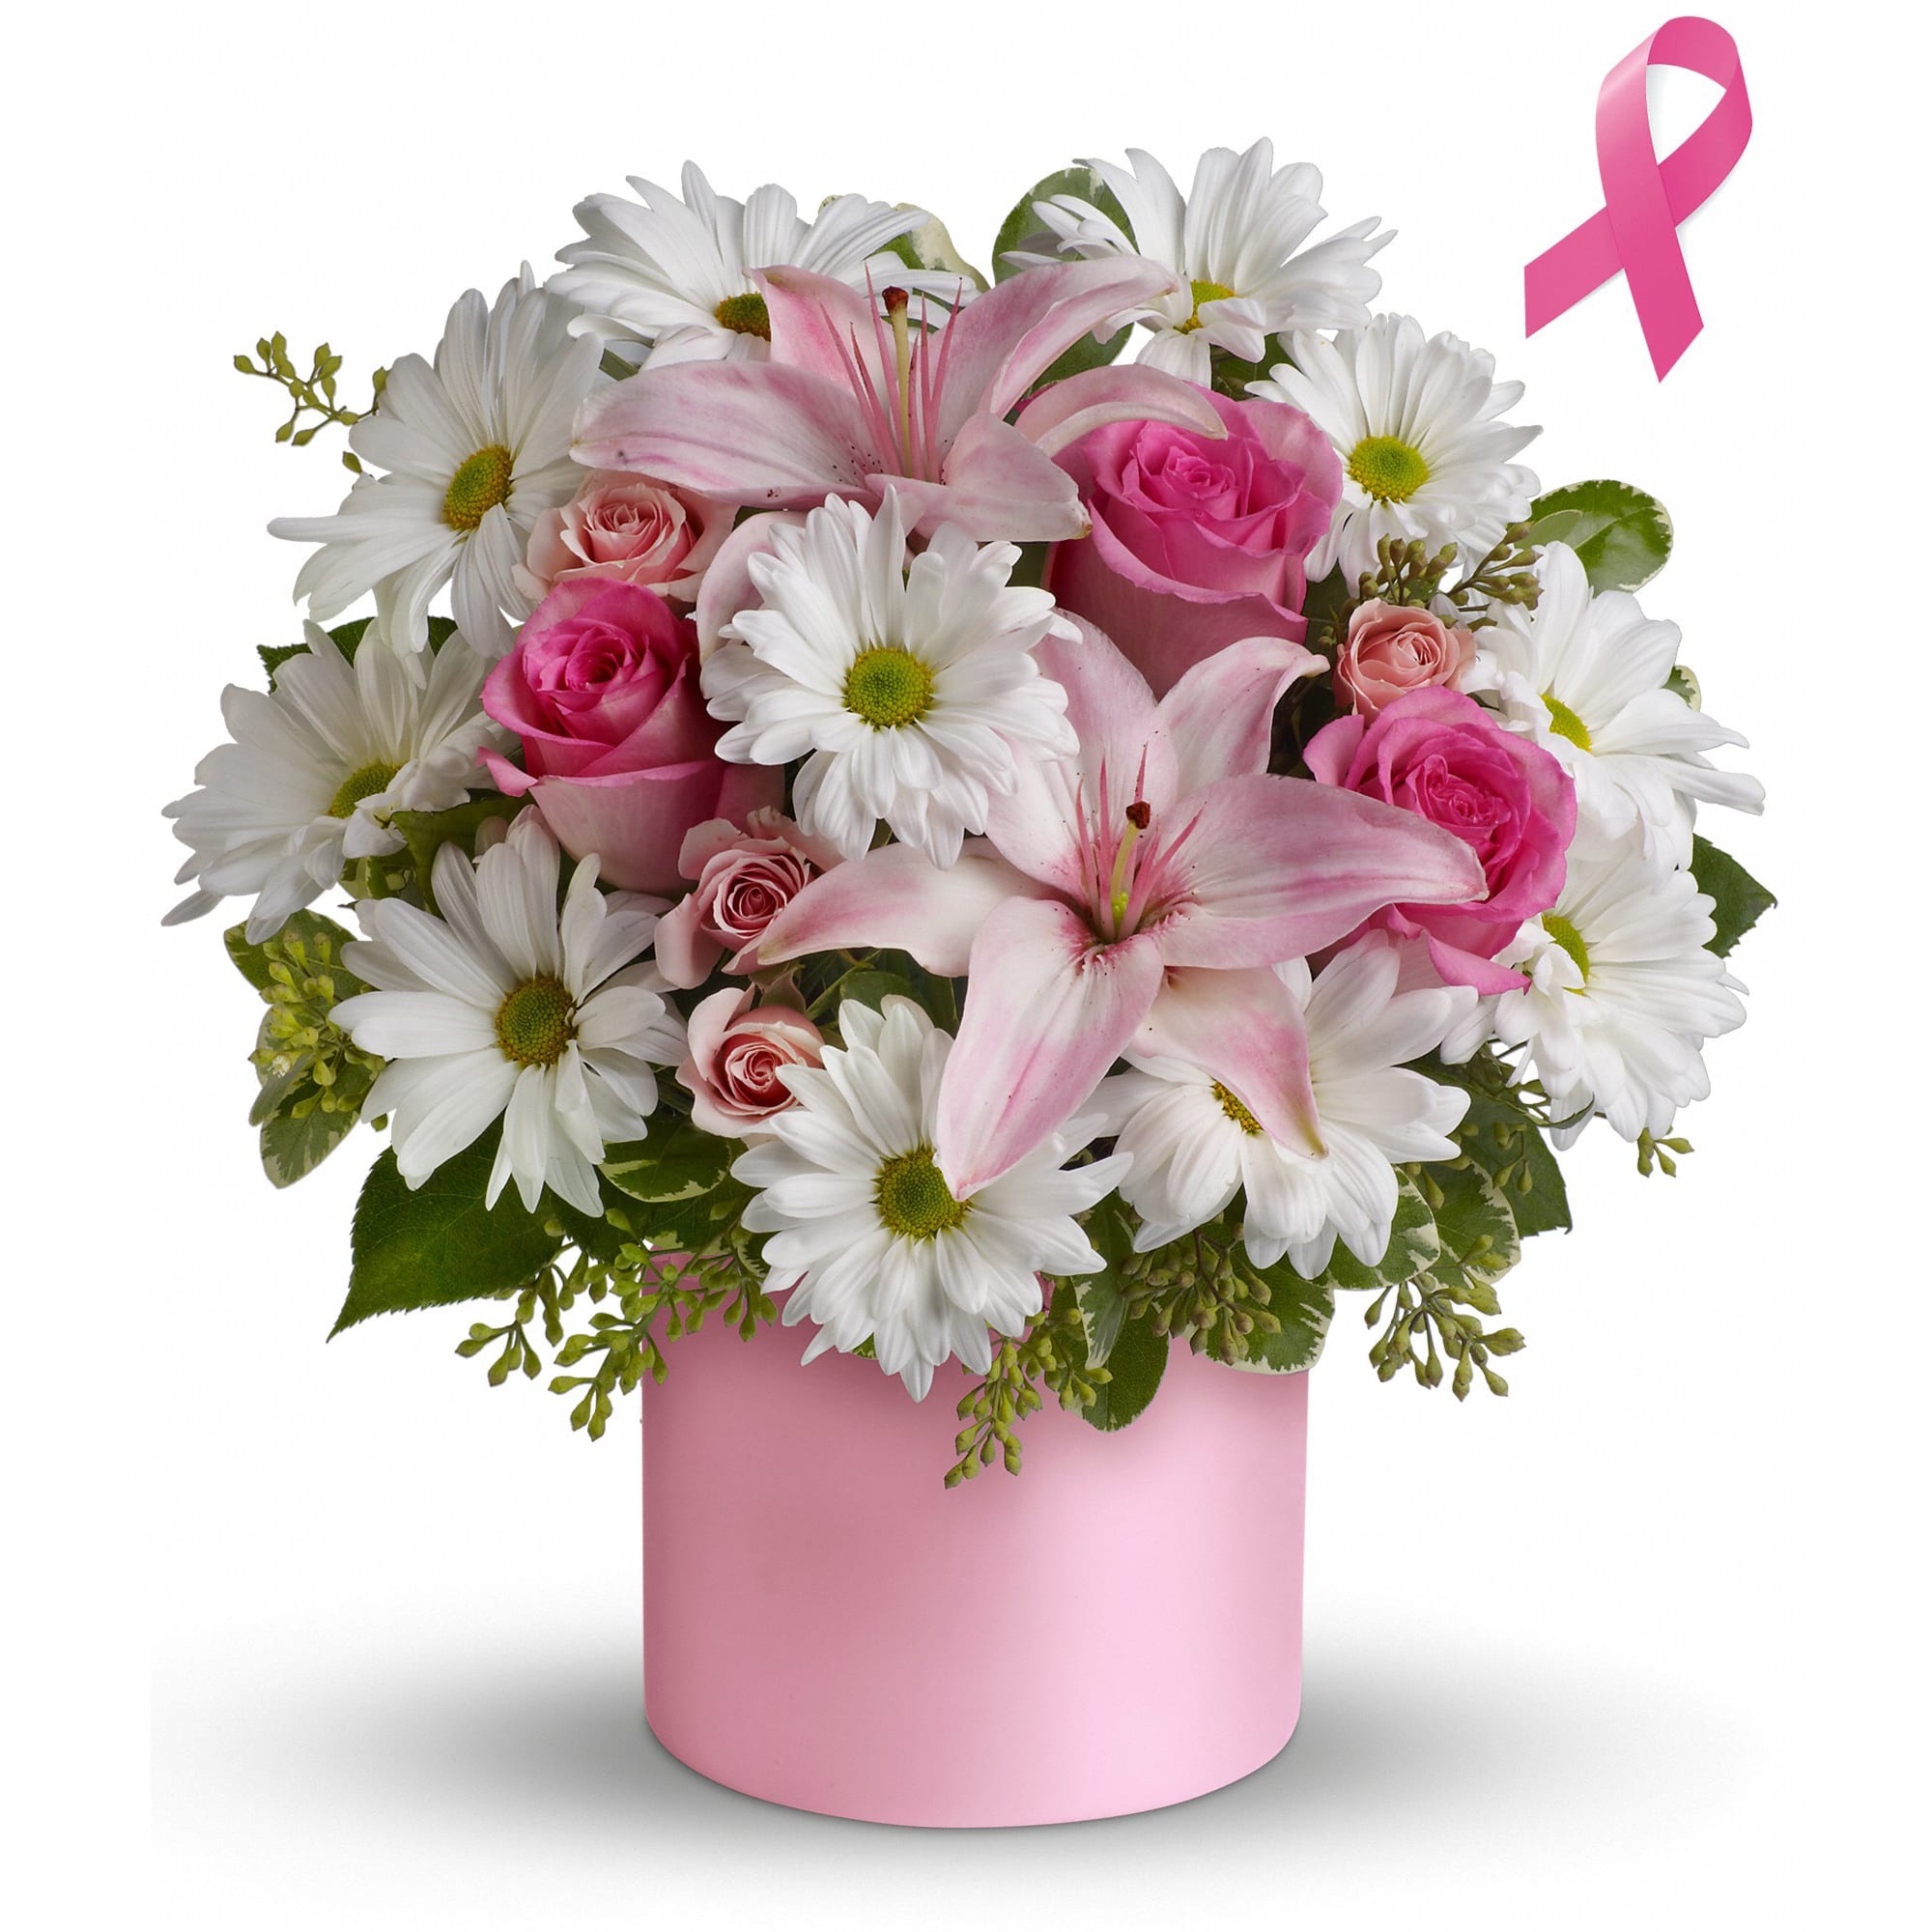 Teleflora's Pink Hope and Courage Bouquet - Celebrate the fabulous female in your life with pink roses and lilies in a satiny pink cylinder vase. She'll be thrilled with this charmingly feminine gift - and touched by your thoughtfulness because it is also a gift for others. 